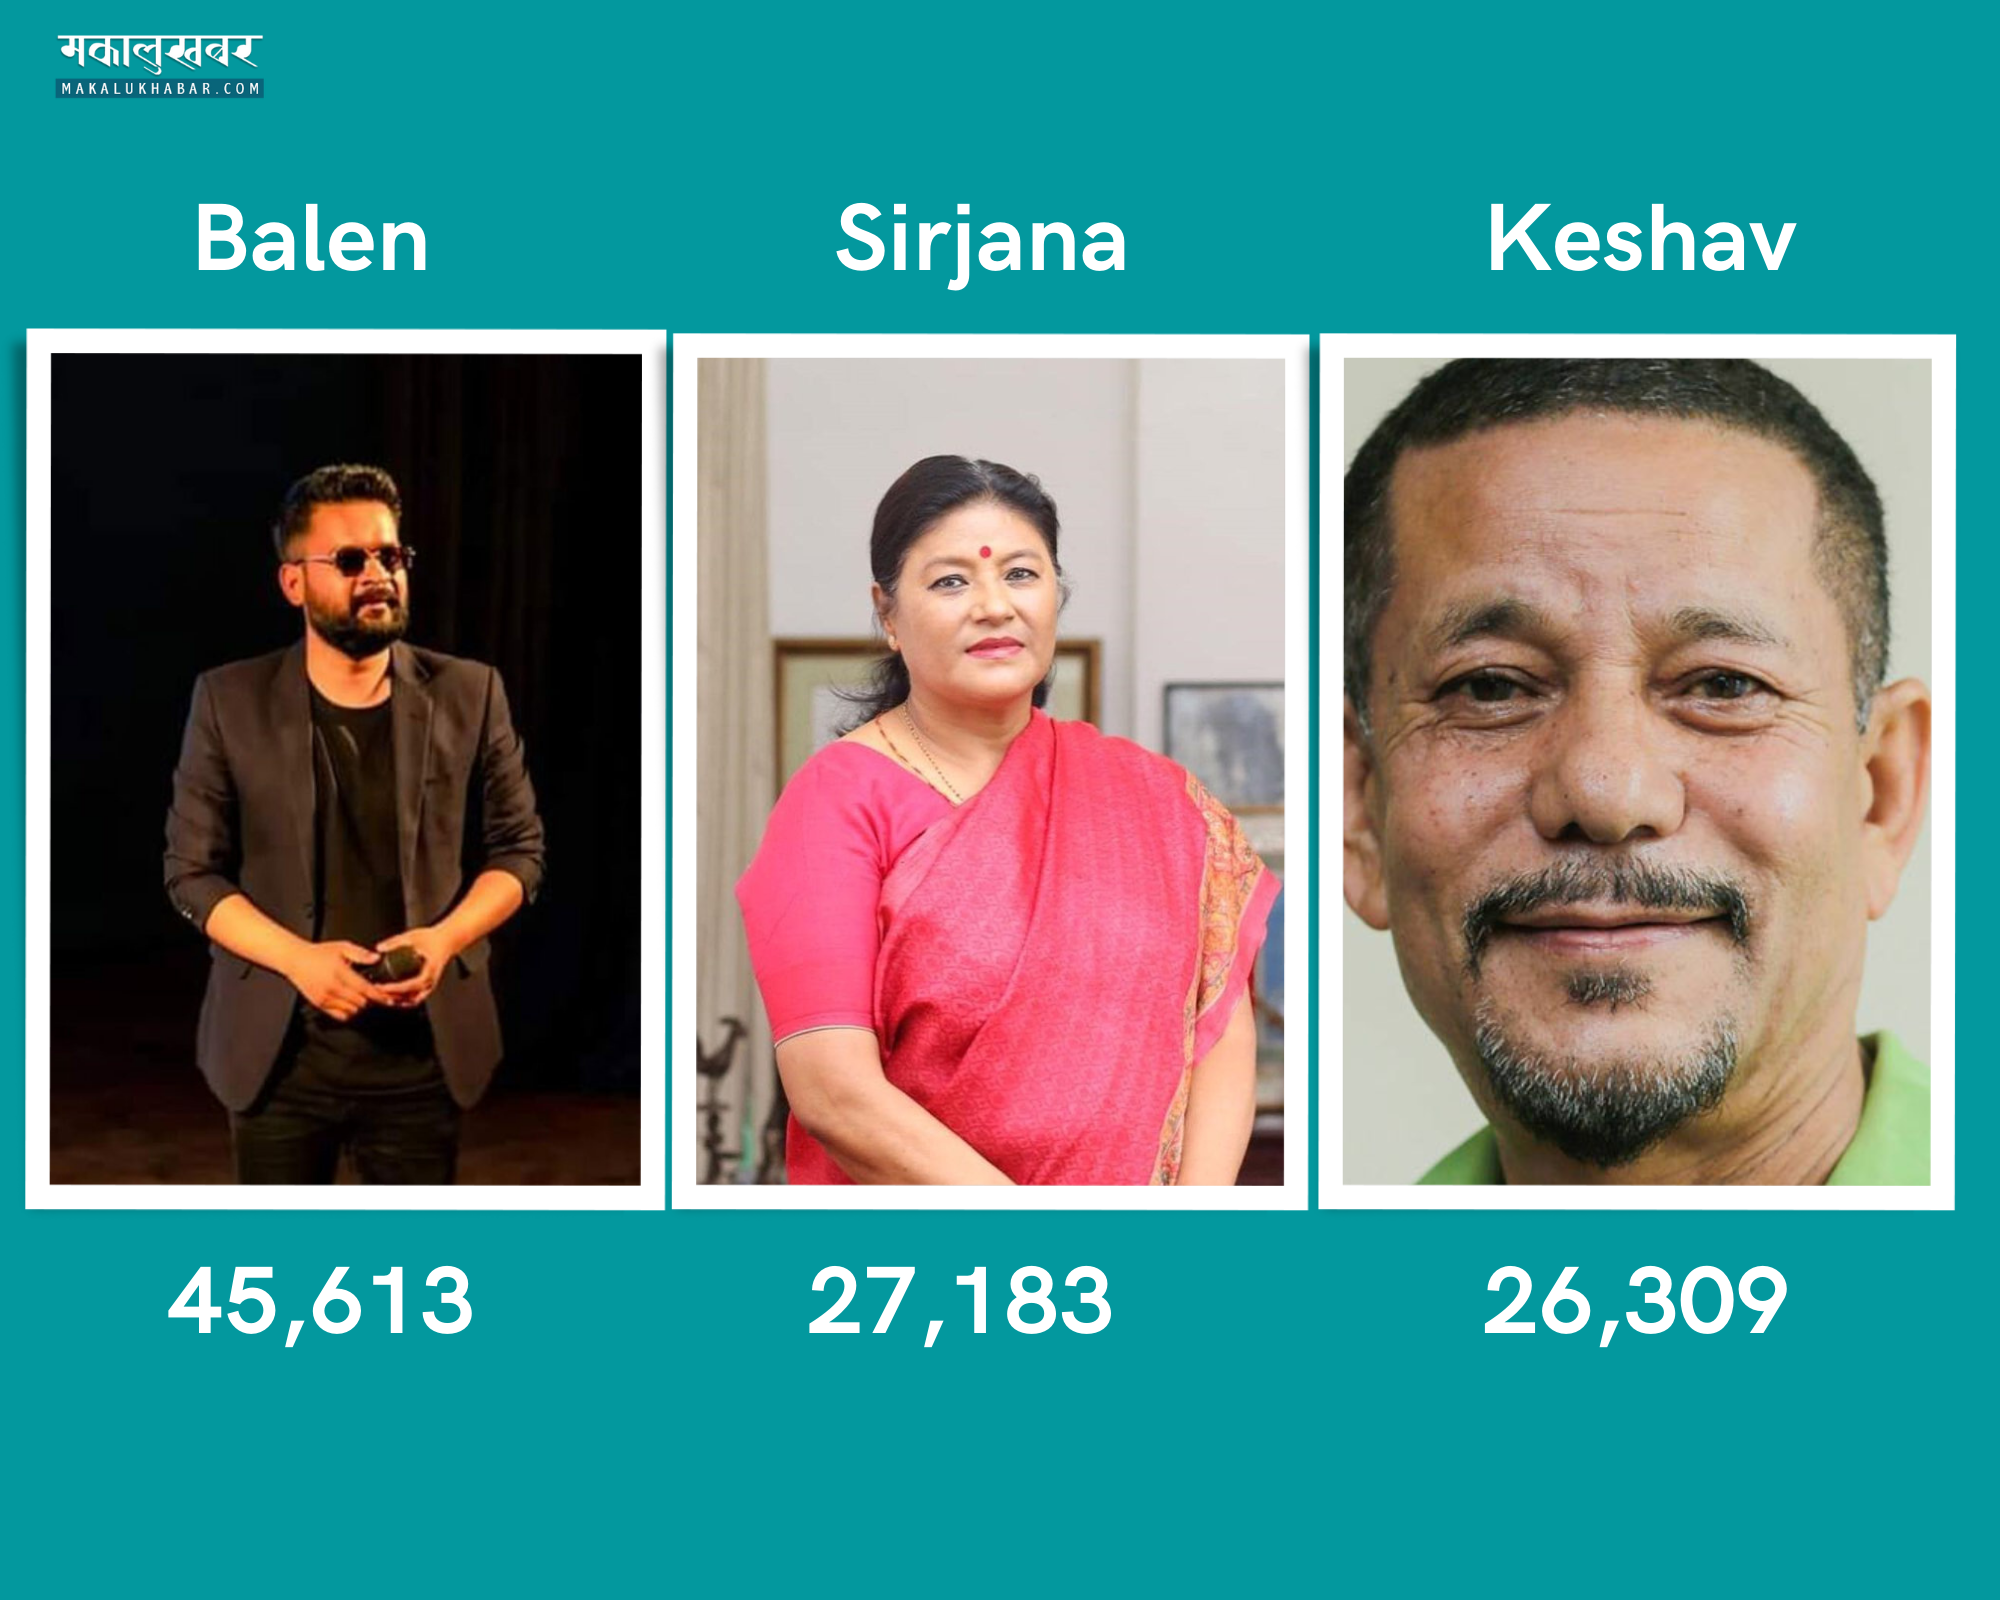 Singh & Sthapit  battling, with Balen leading with 45,613 votes in Kathmandu